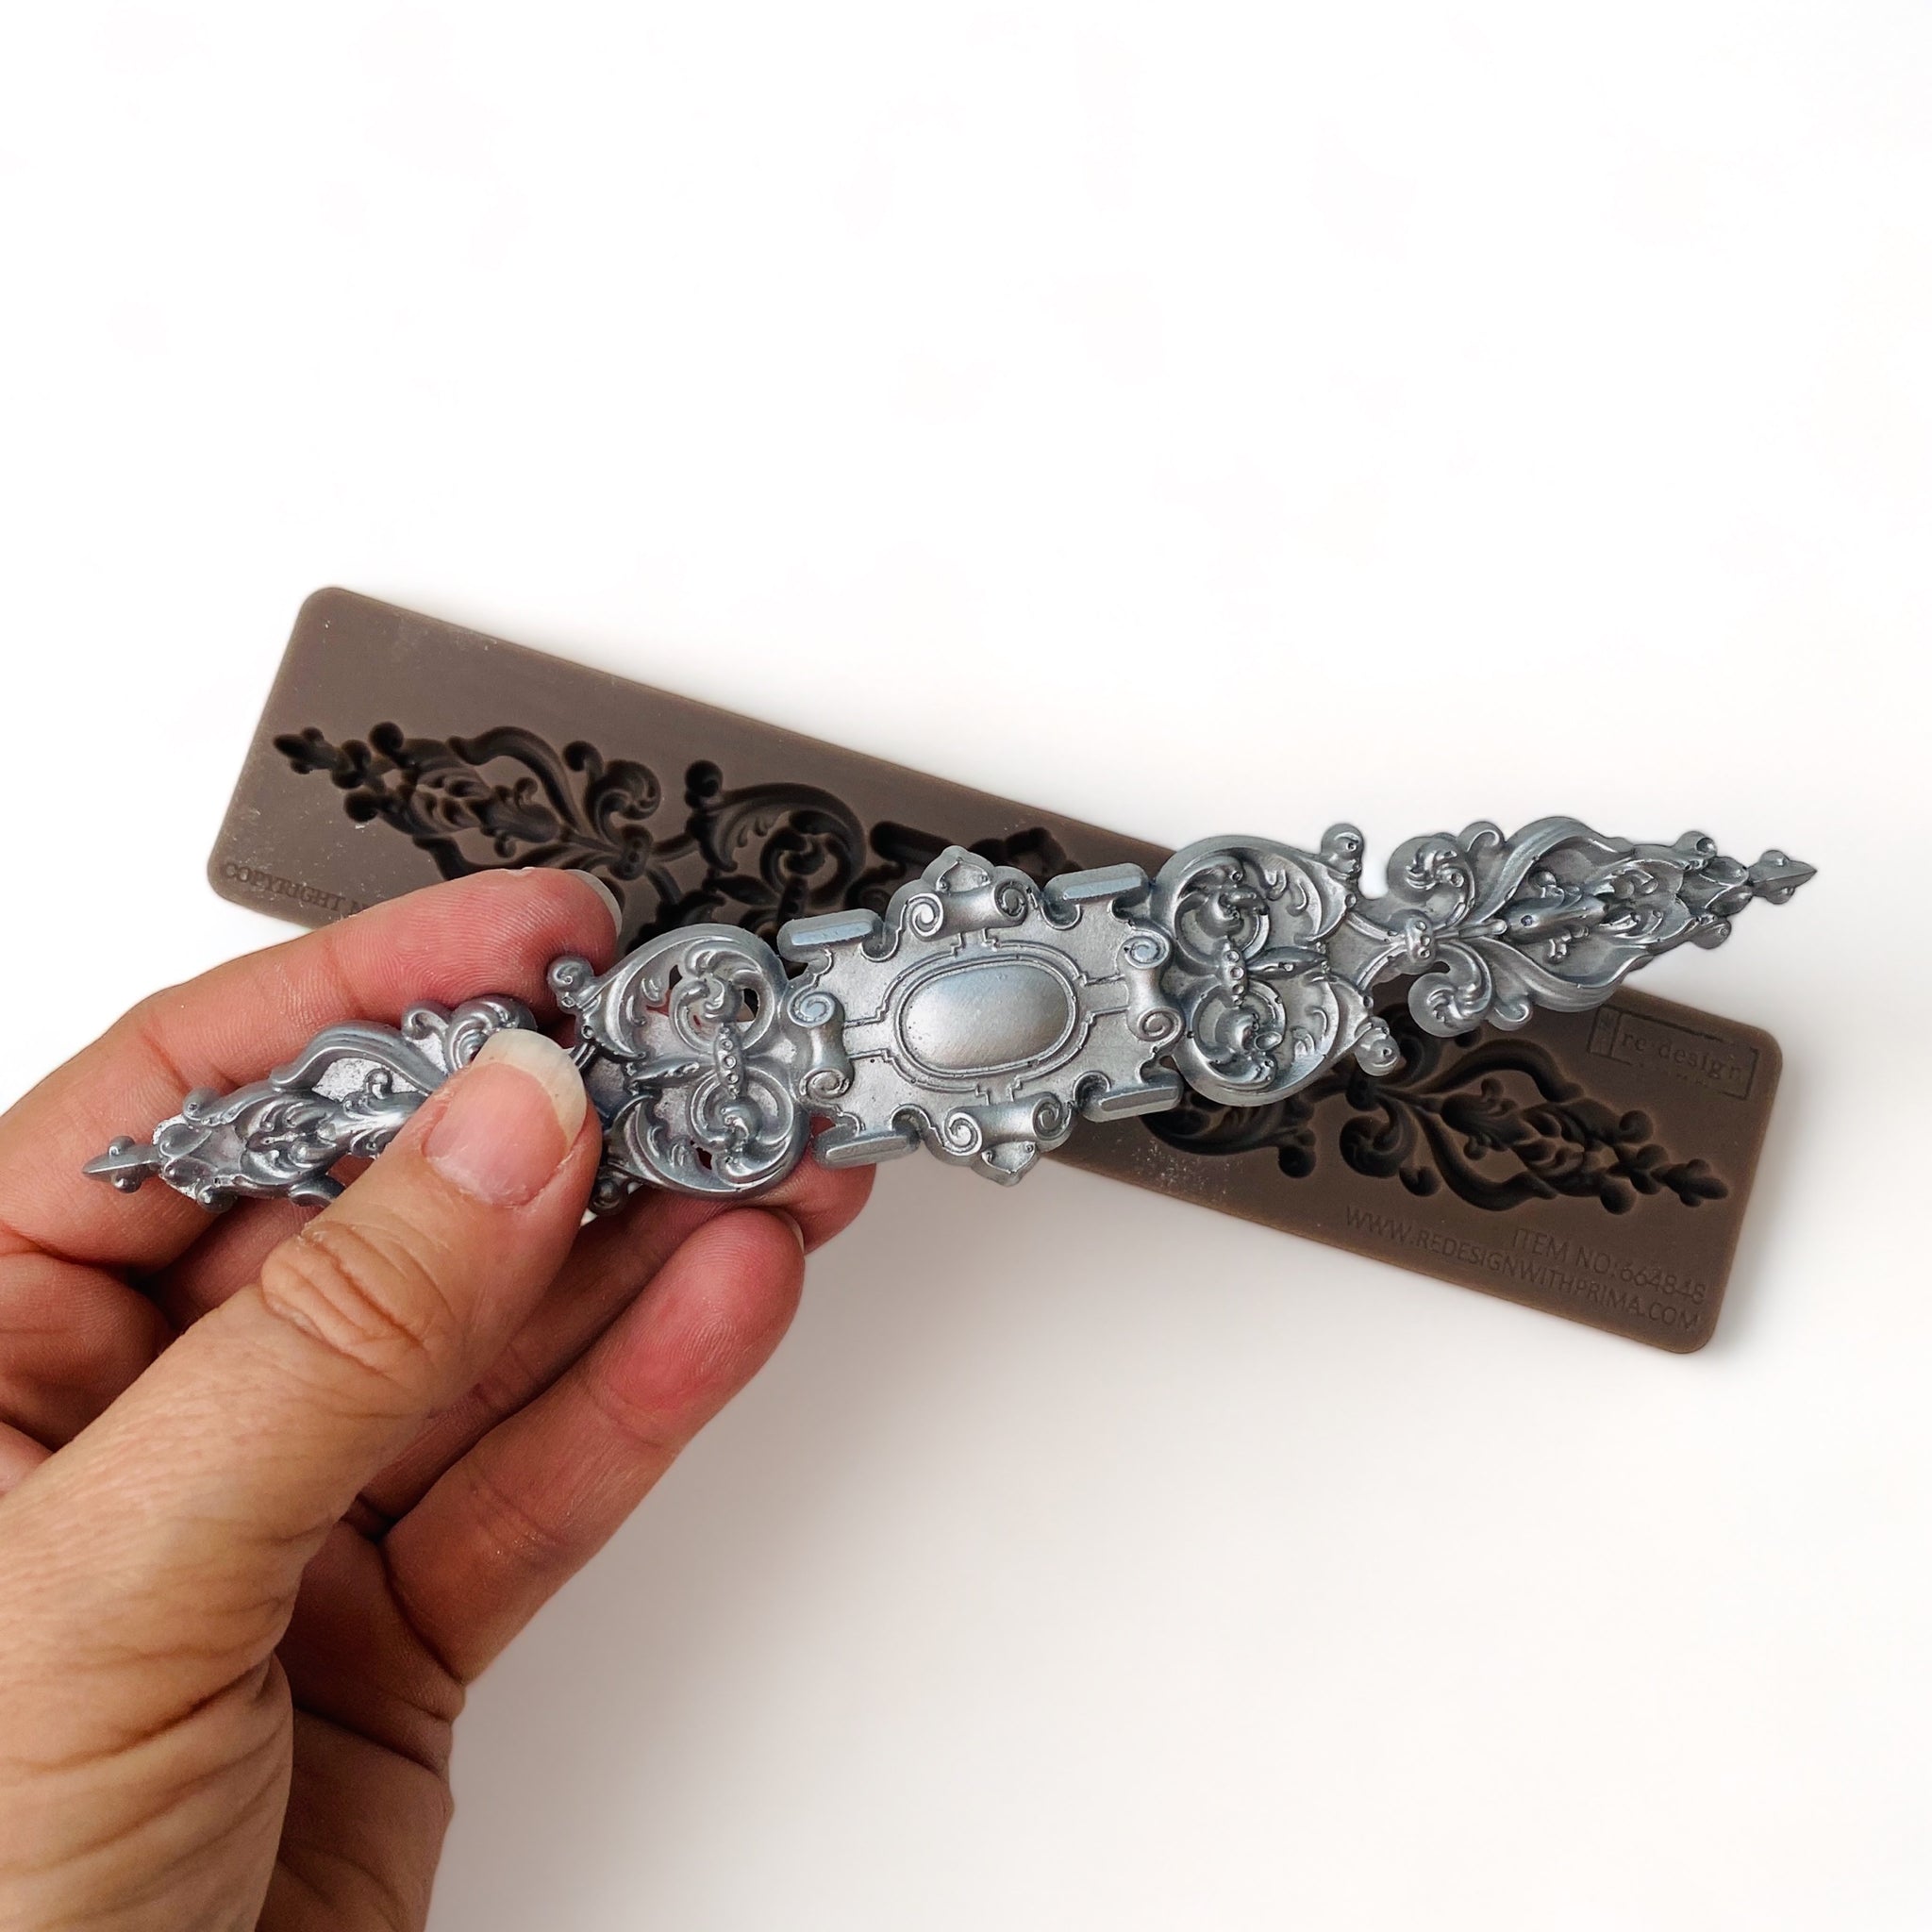 A brown silicone mold and a hand holding a silver colored casting of a long, ornate, scroll decorative center medallion are against a white background.